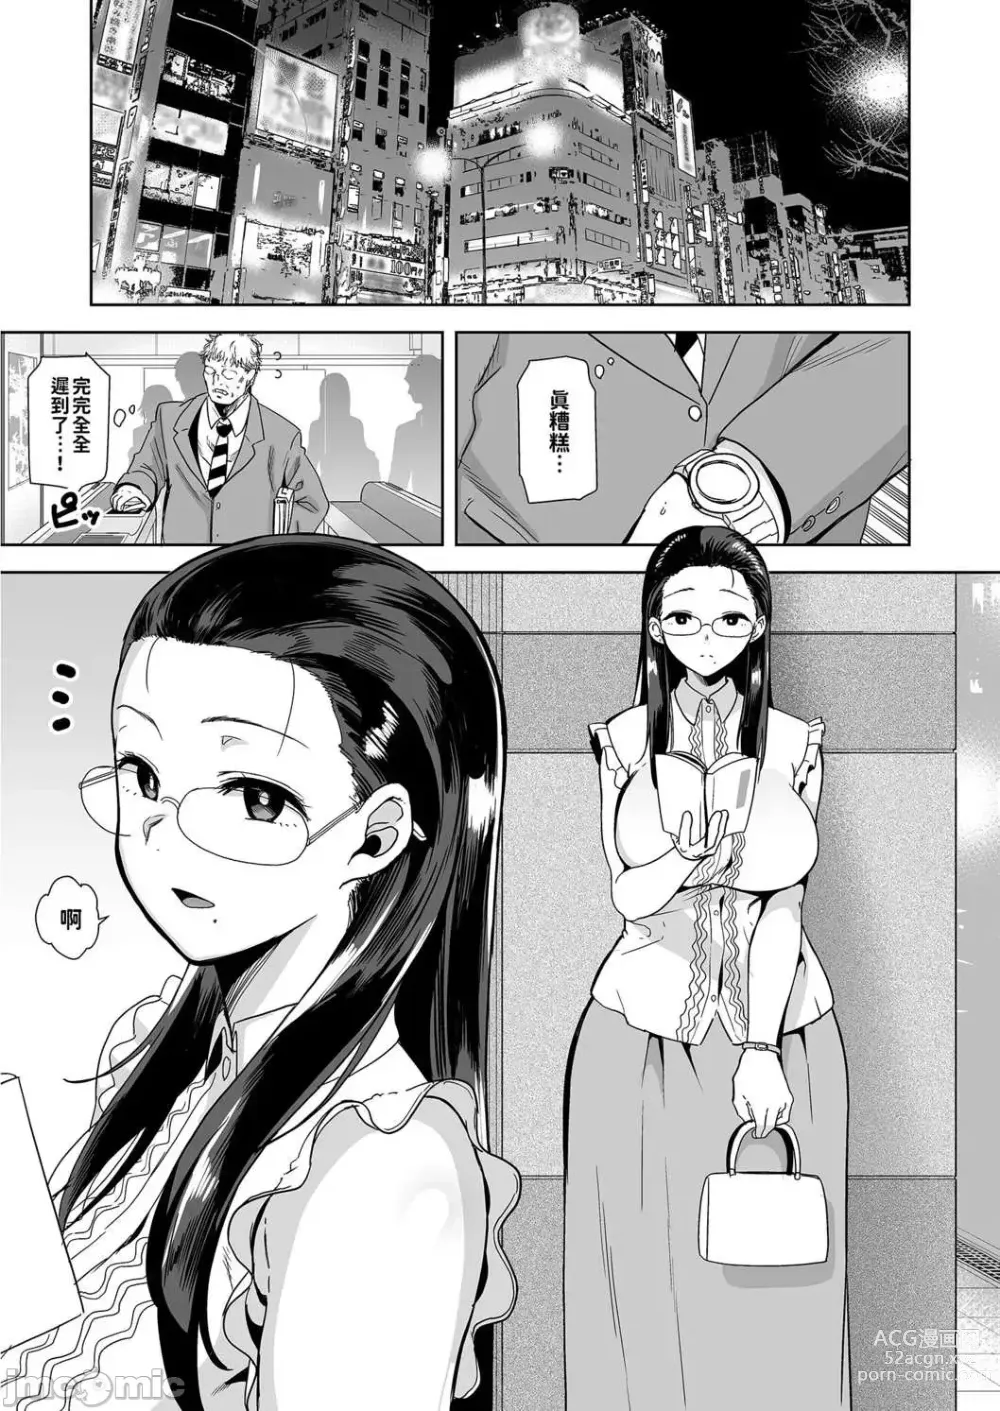 Page 2 of doujinshi Seika Girls Academys Officially Approved Prostitute Man 1 + 2 + 3